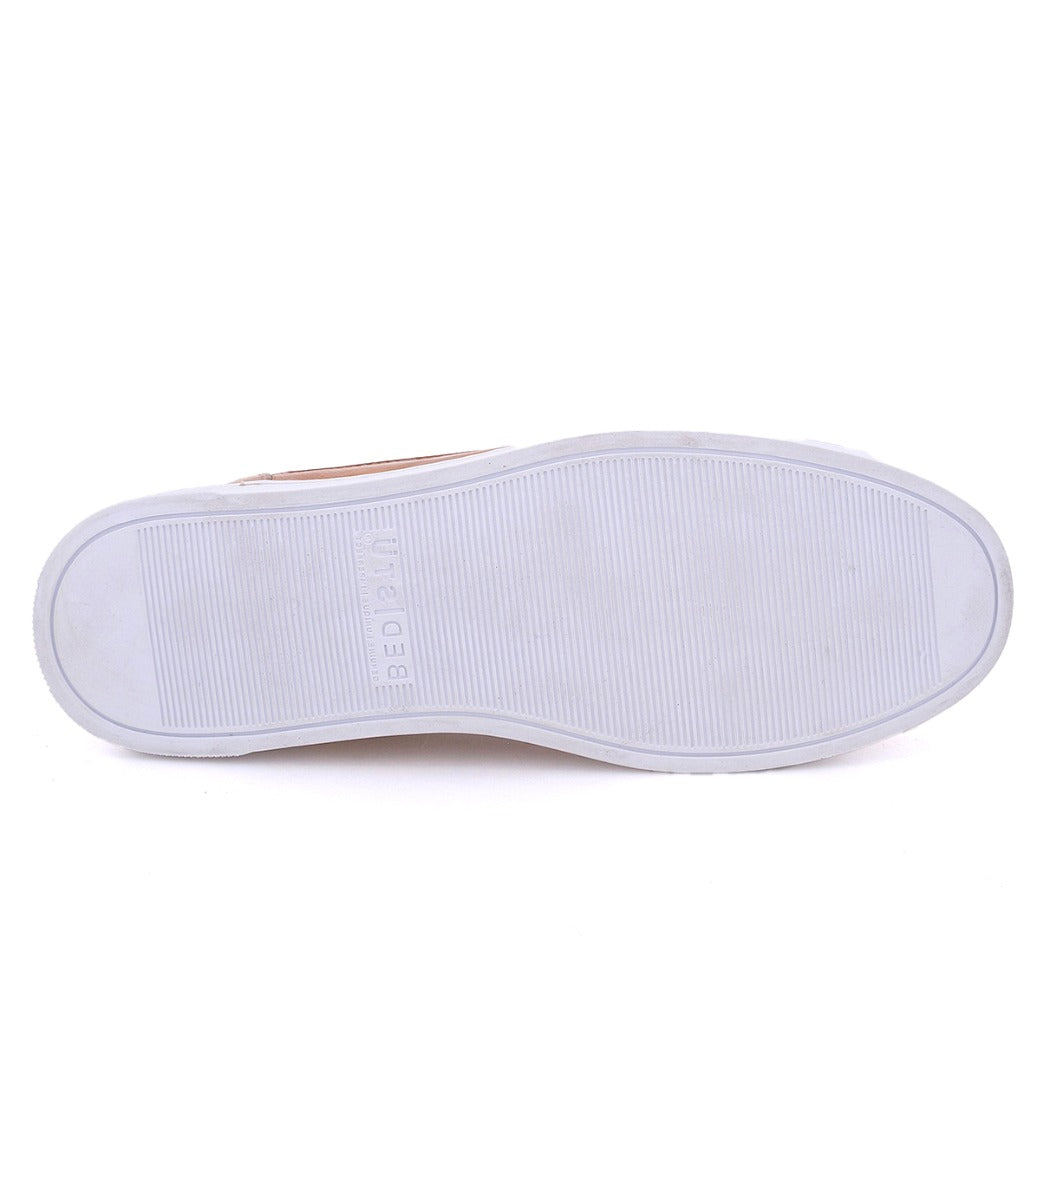 A pair of Bed Stu Wizard shoes with white soles on a white background.